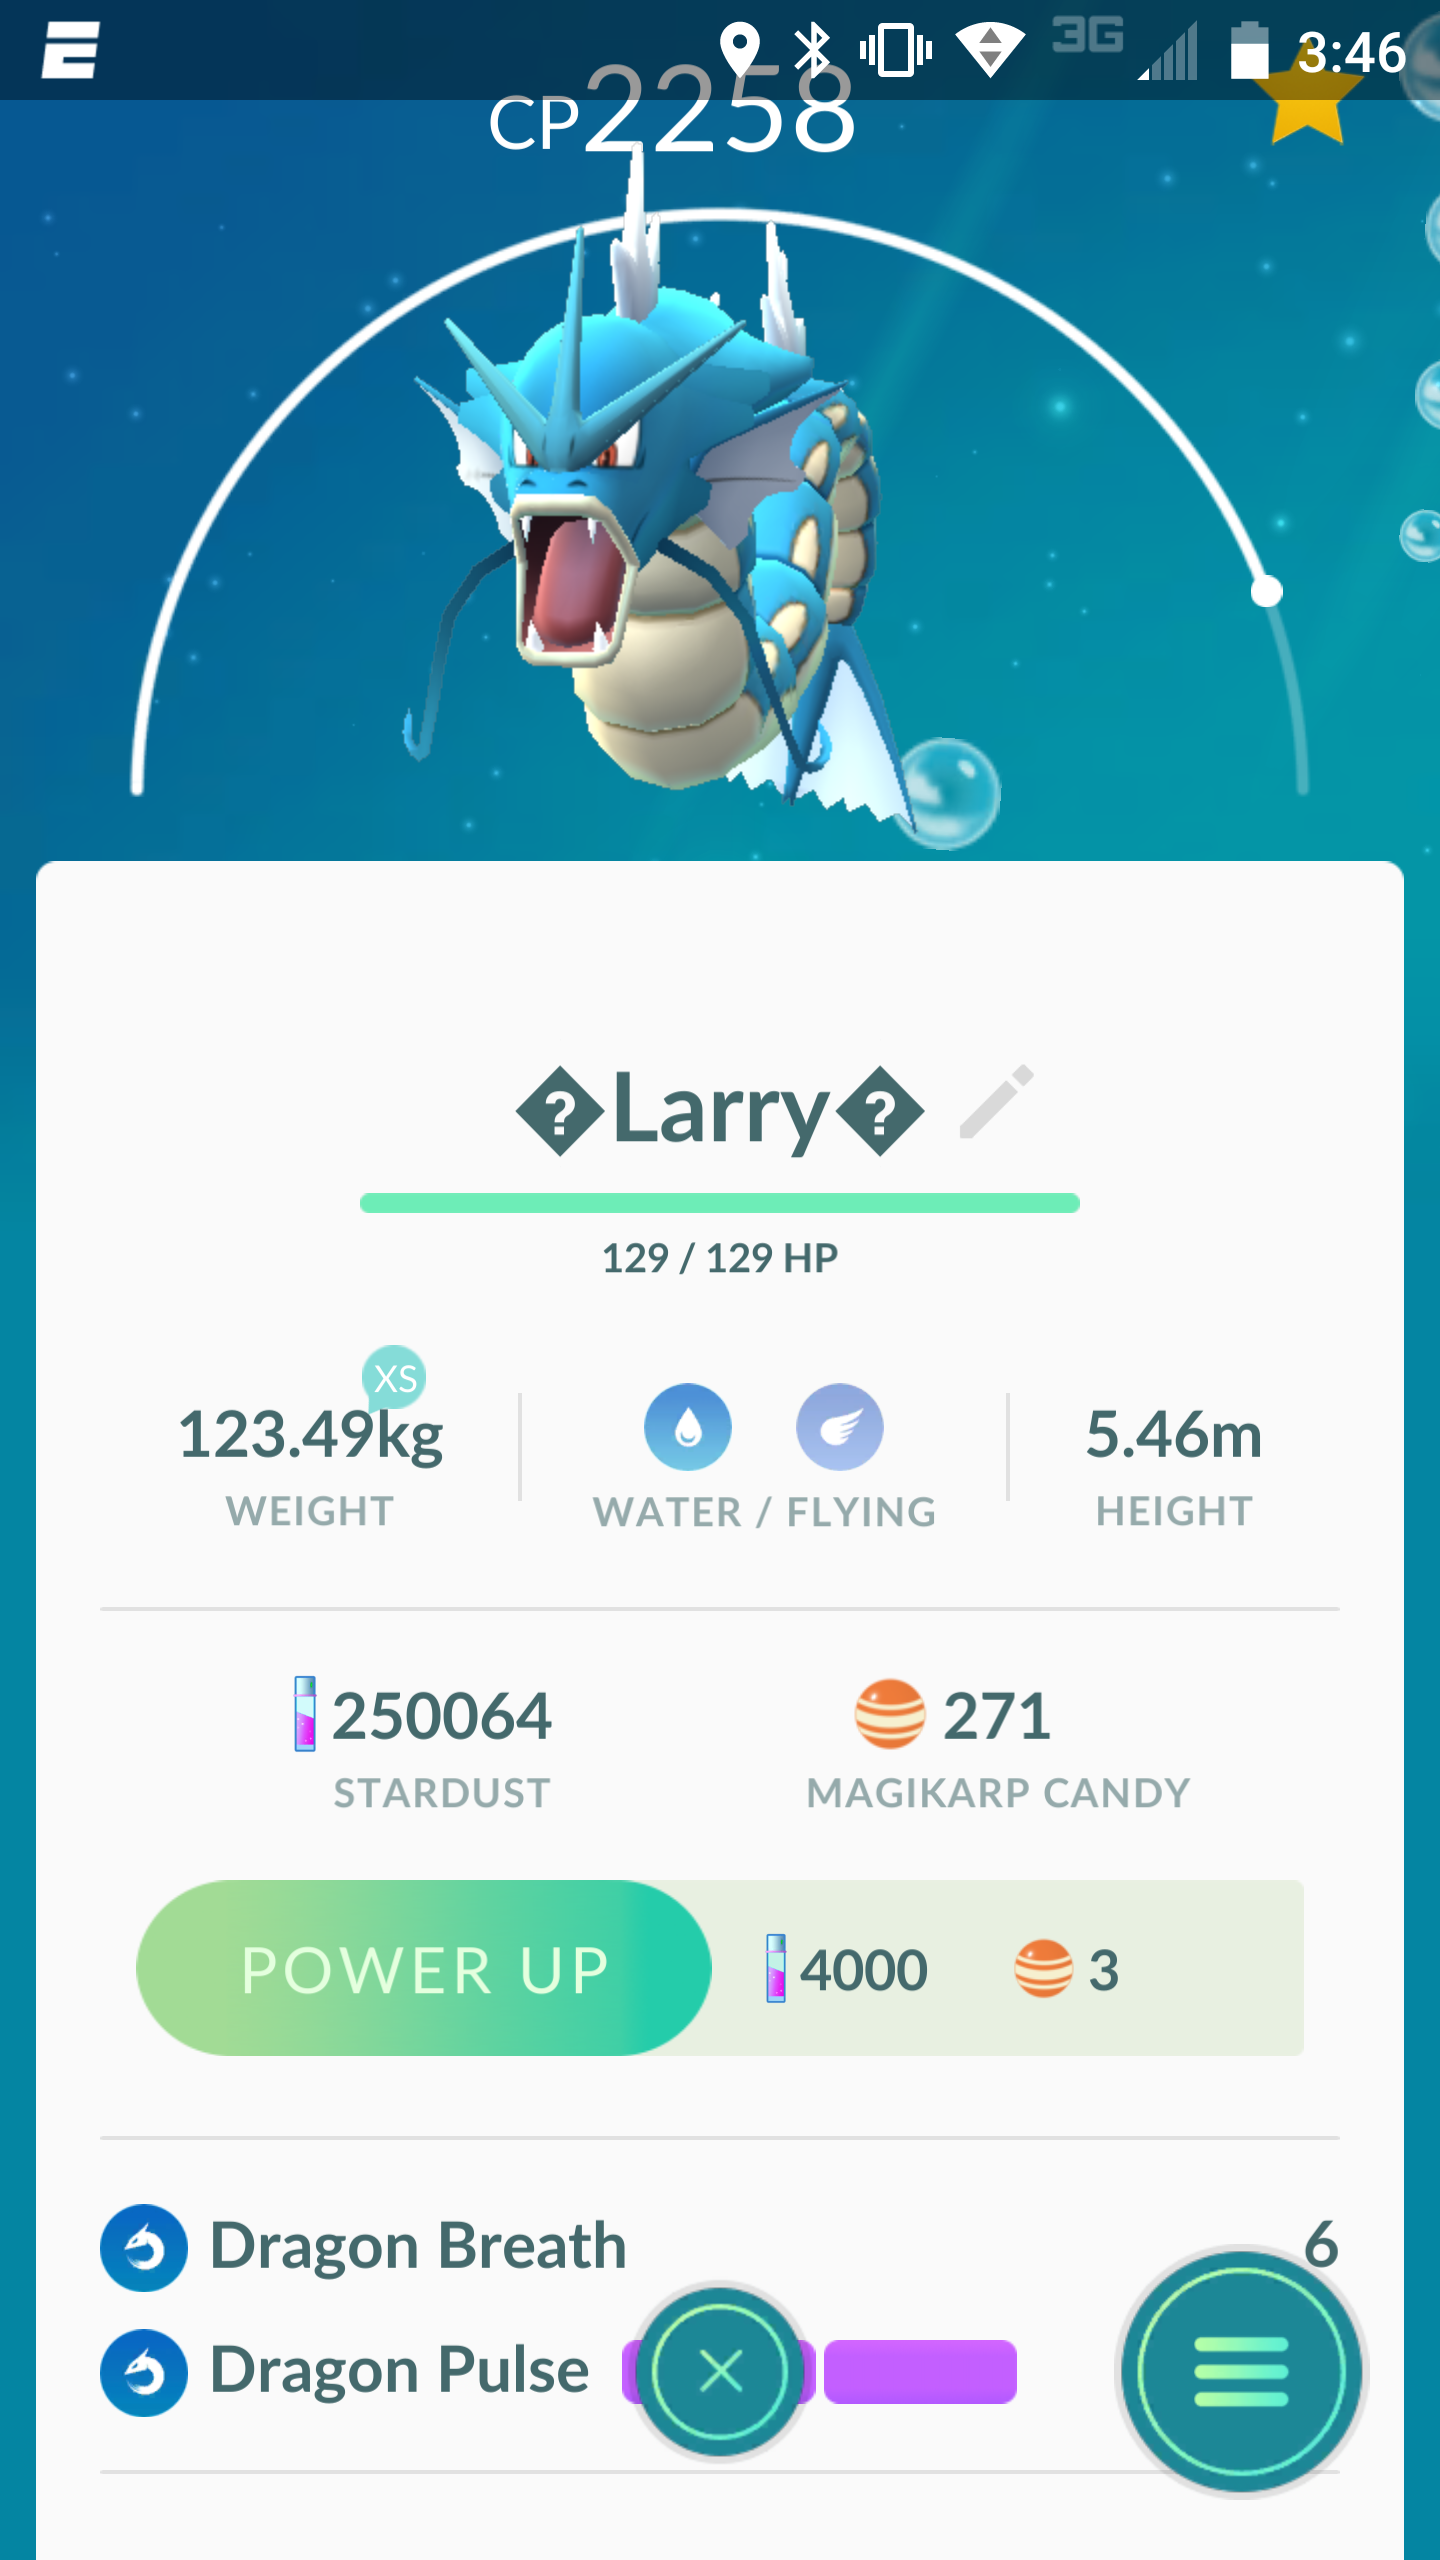 What should I do with this legacy Gyarados?